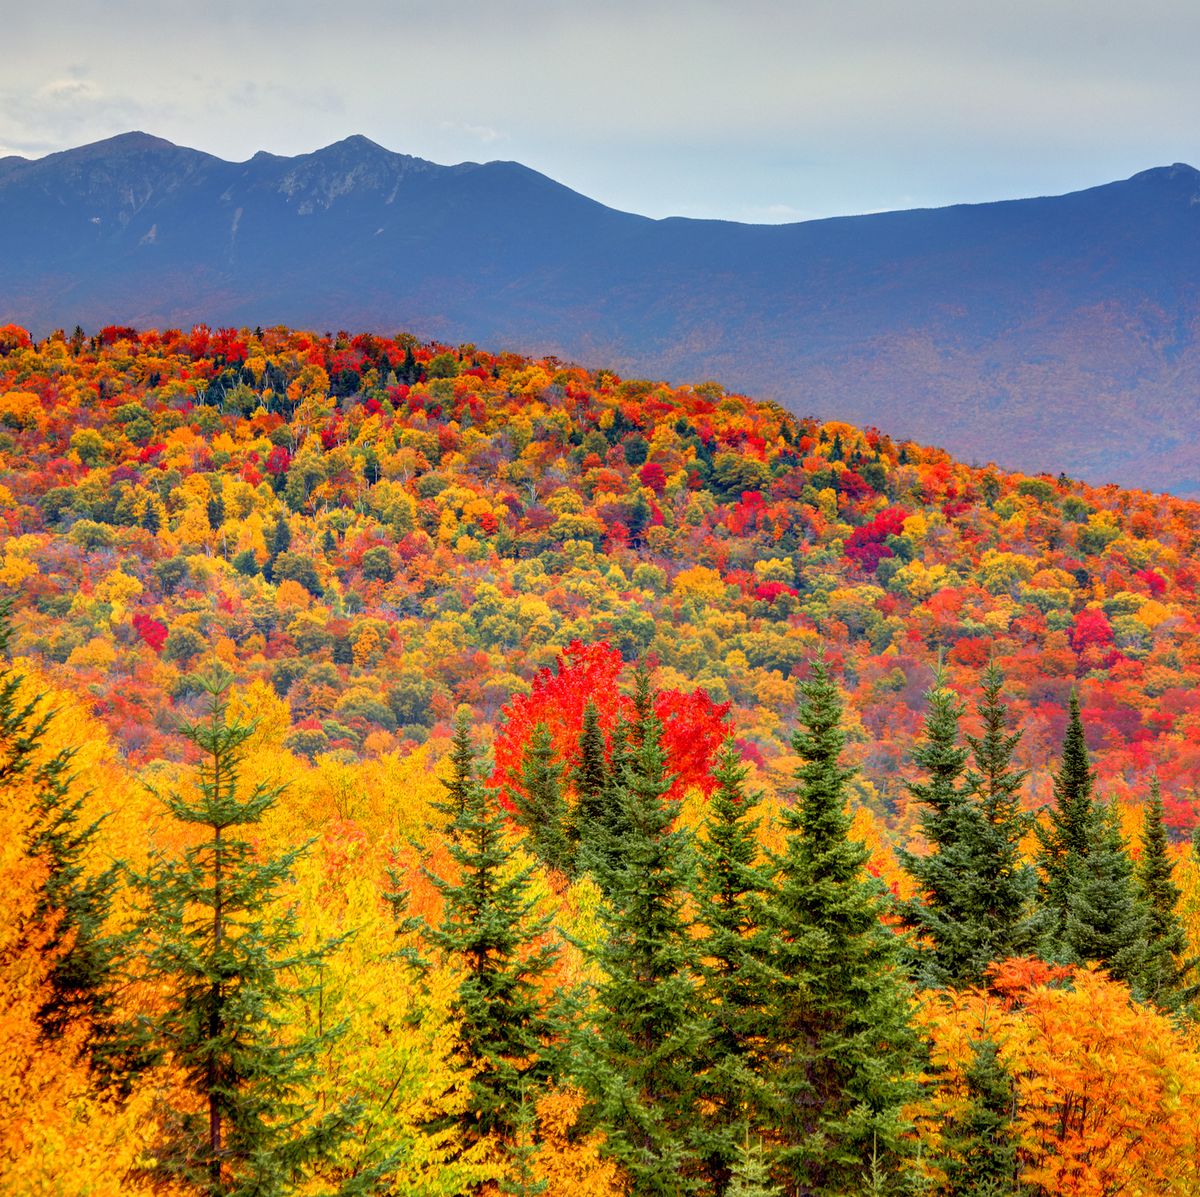 Autumn in the White Mountains of New Hampshire